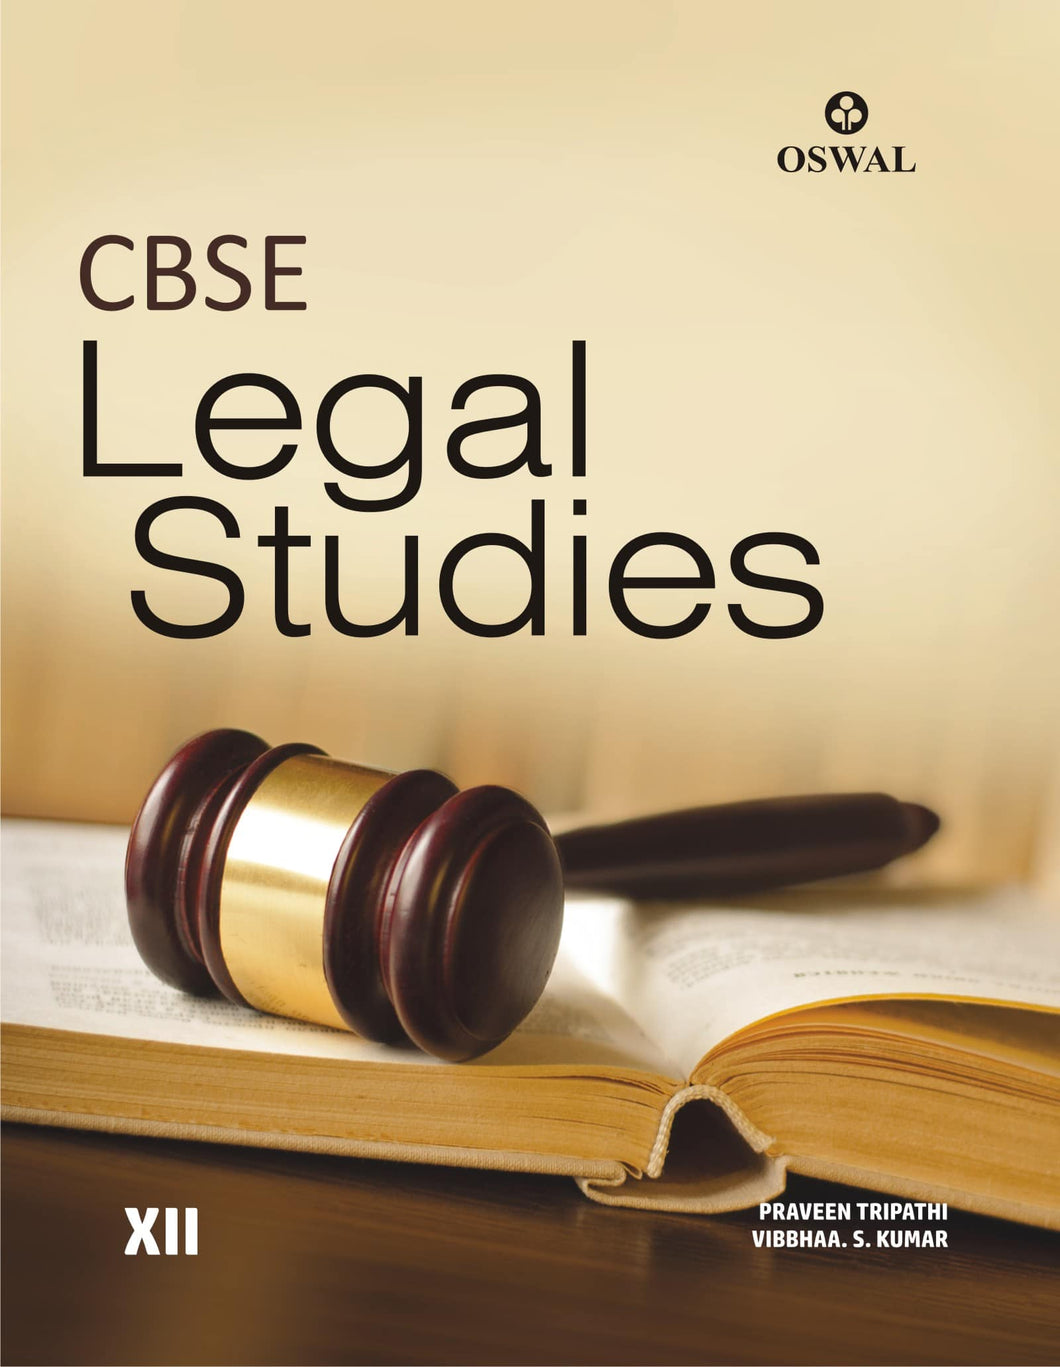 oswal Legal Studies: Textbook for CBSE Class 12